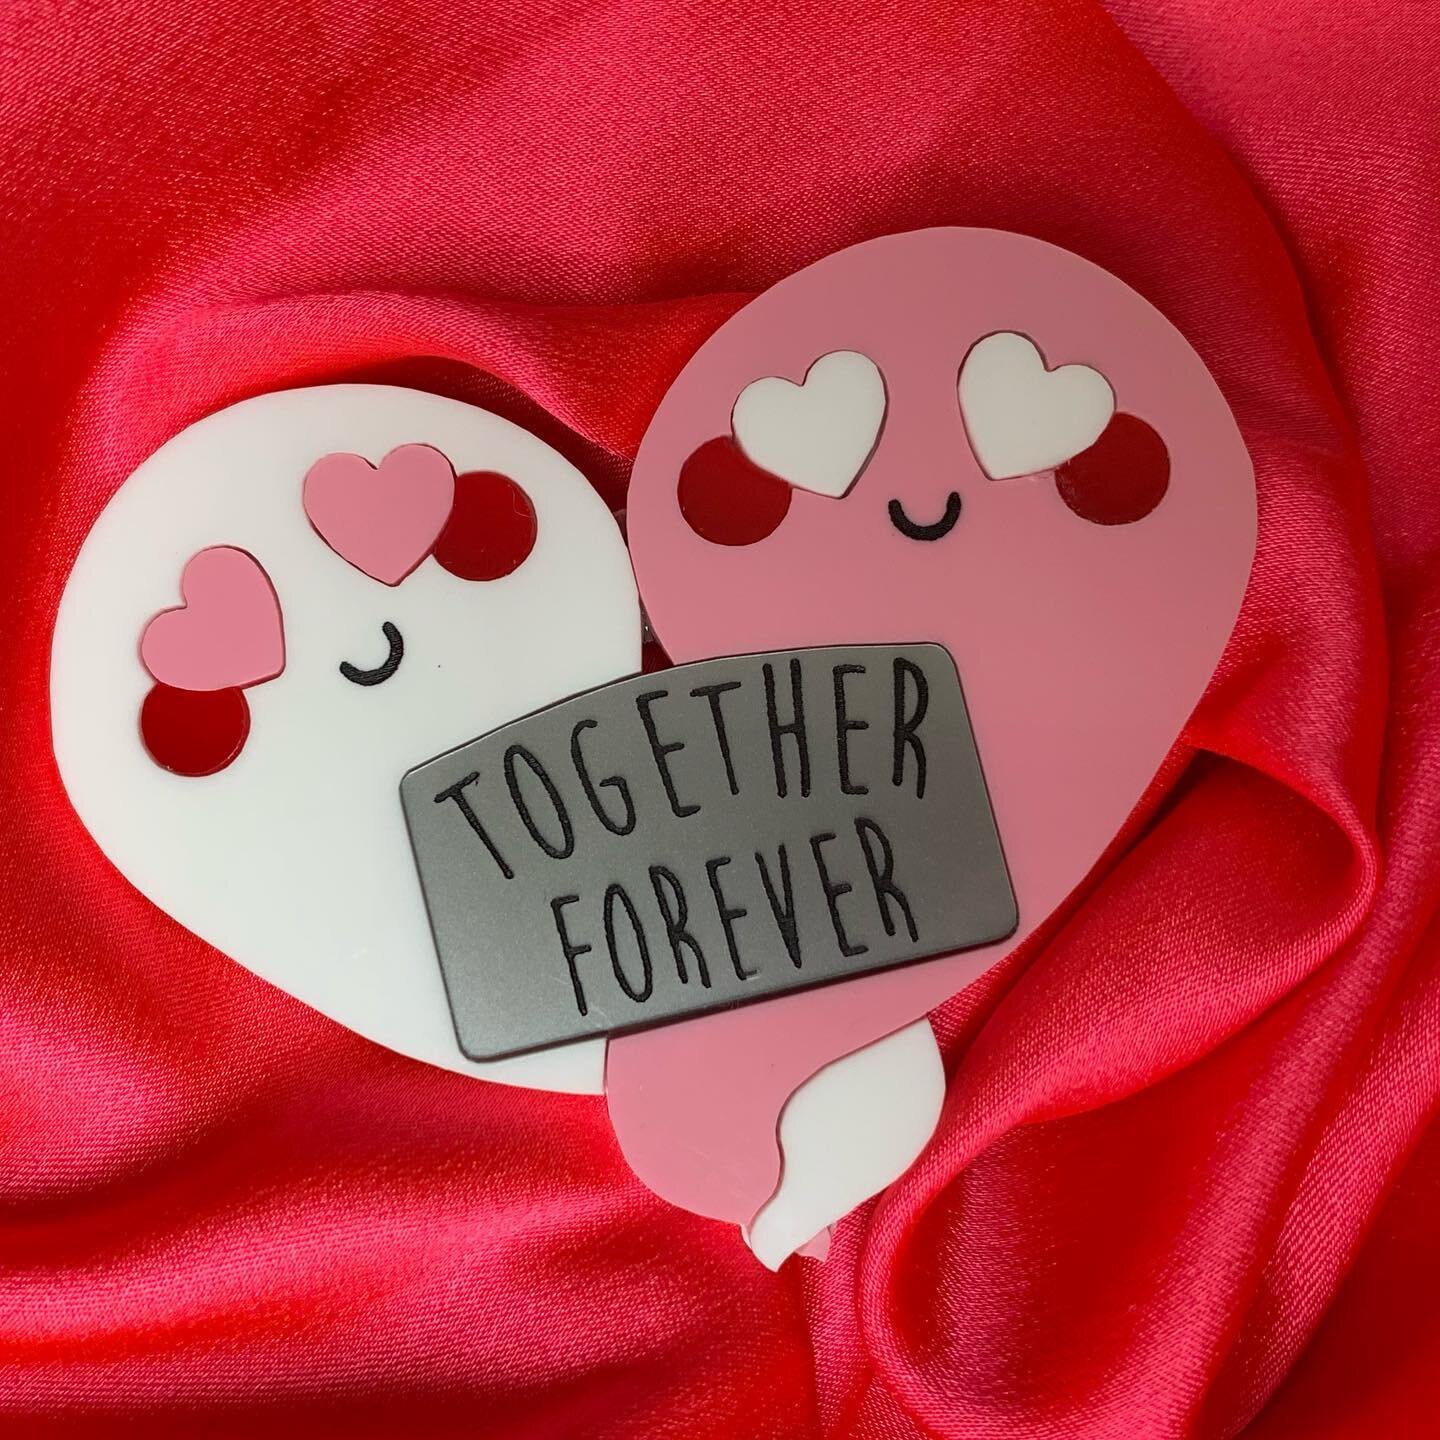 Ghostie Couple Pin
3&rdquo; x 2.5&rdquo;
$20
.
.
.
#rijiddesigns #pin #ghosts #togetehrforever #spooky #cute #love #acrylic #smallbusiness #shoplocal #gta #toronto